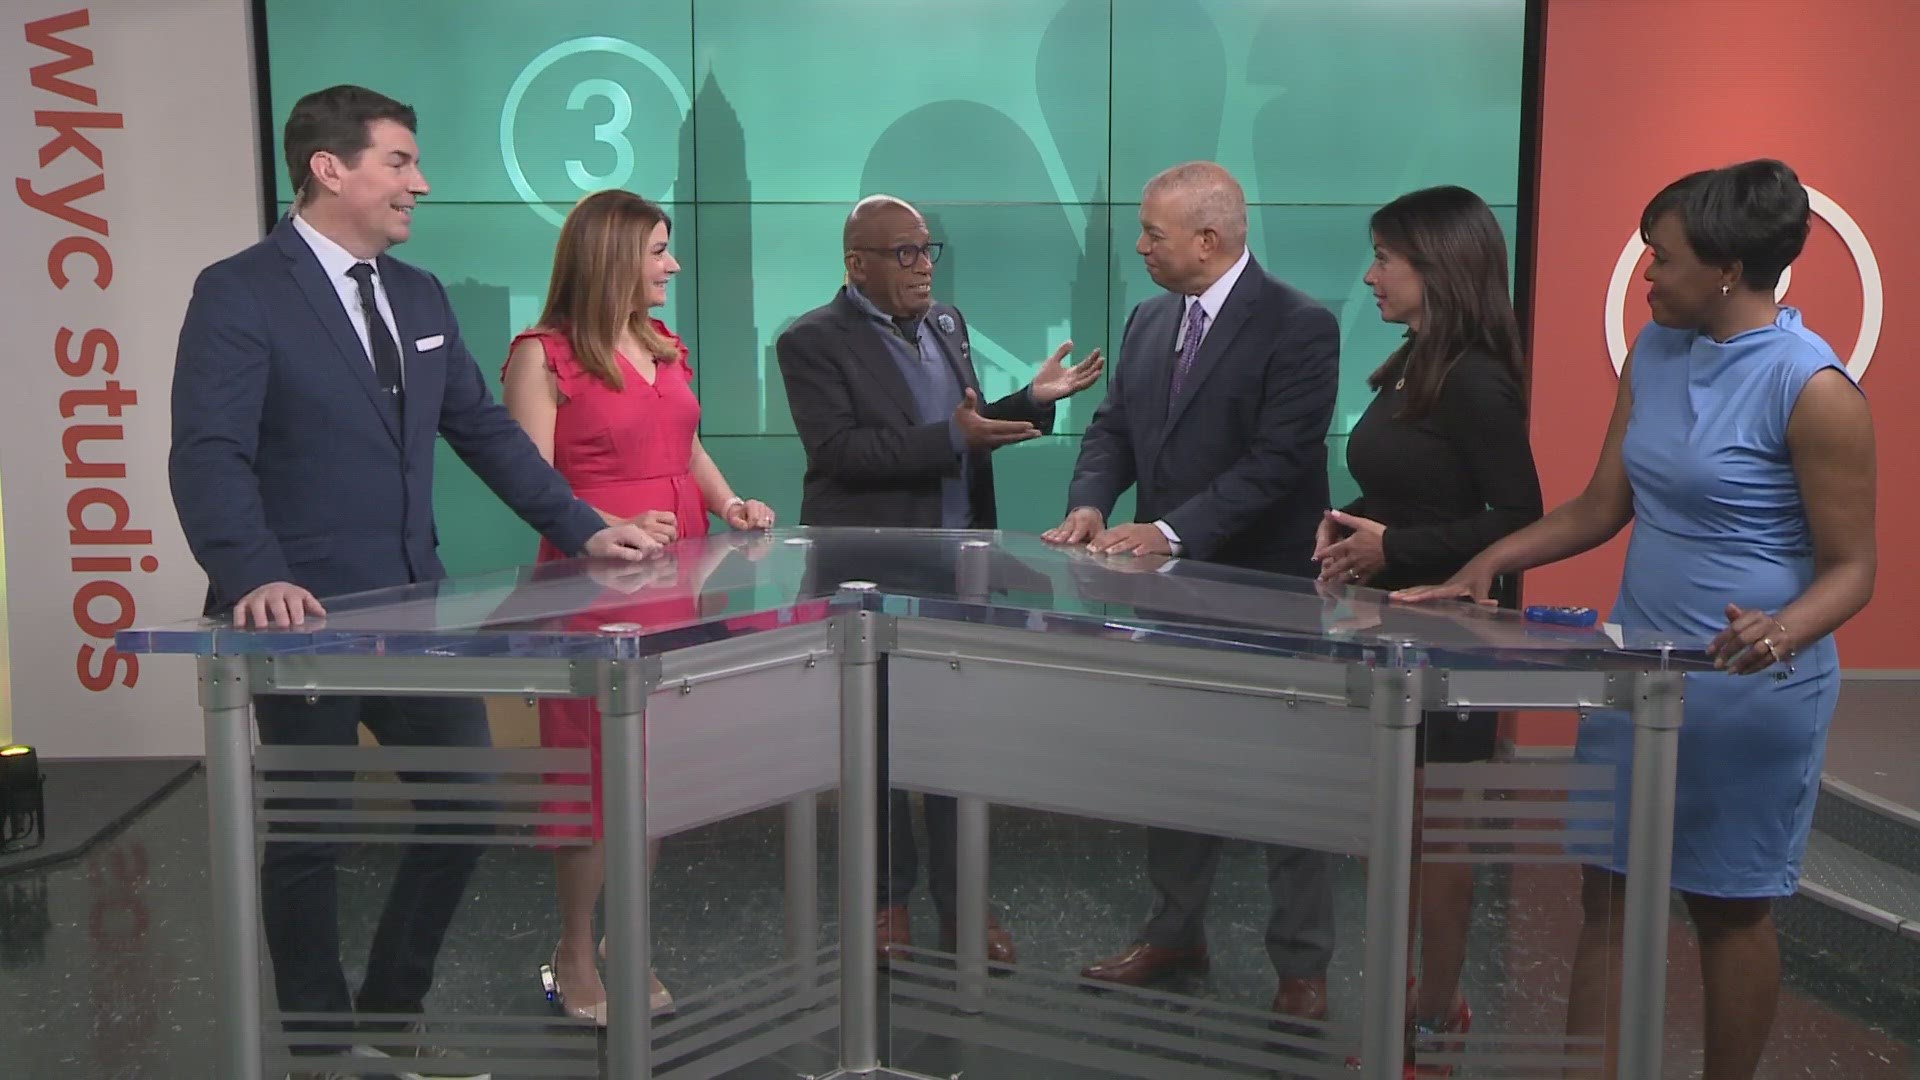 What a fun morning! Here's a quick look back at Al Roker's visit with us at WKYC Studios in Cleveland.